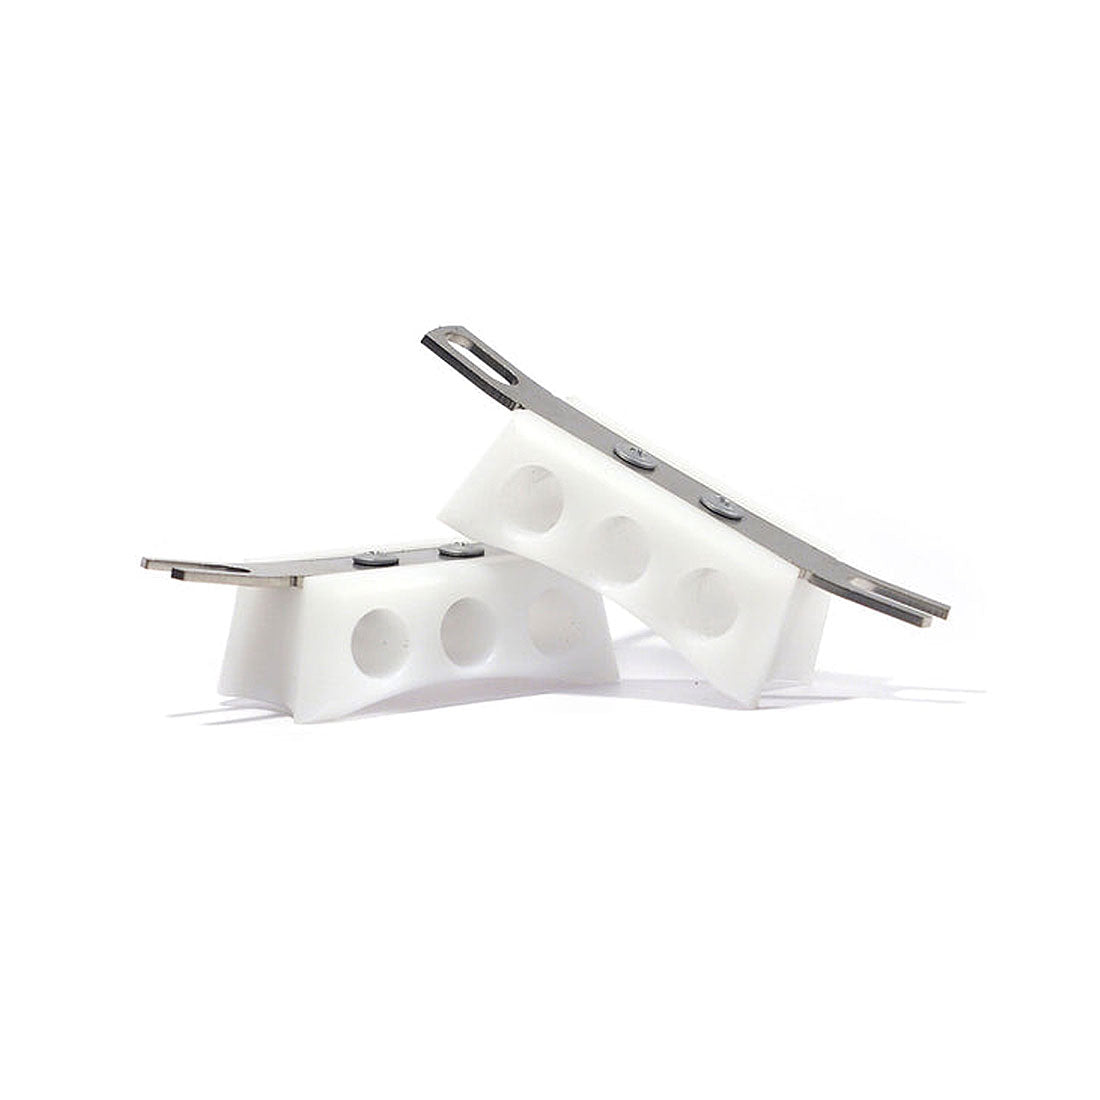 Discoblox Lowrider Grind Blocks - White Roller Skate Hardware and Parts